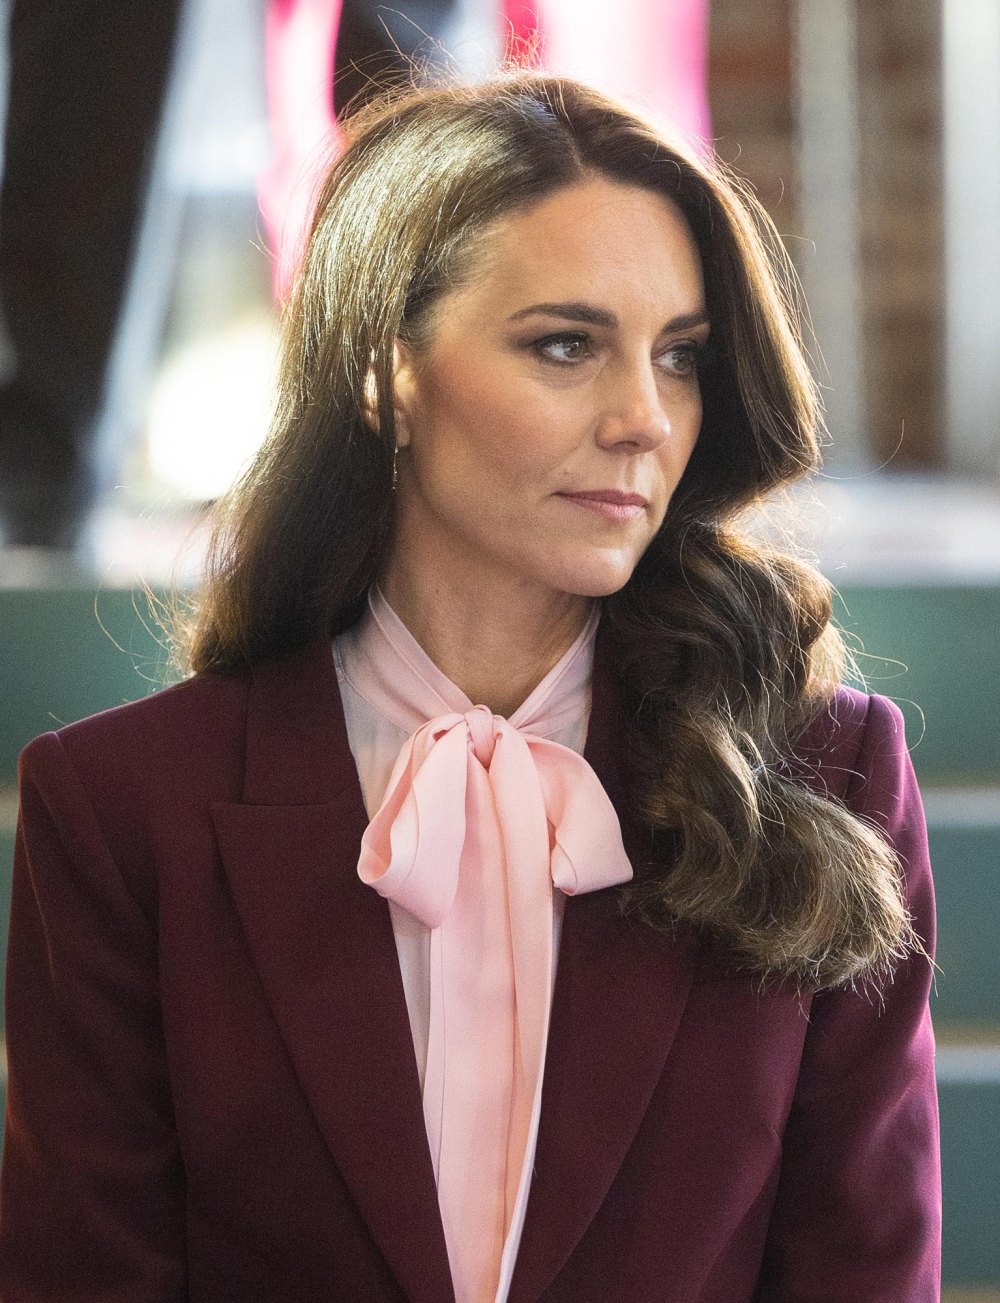 Kate Middleton Online Conspiracy Theories Reportedly Linked to Russian Based Disinformation Campaign 766